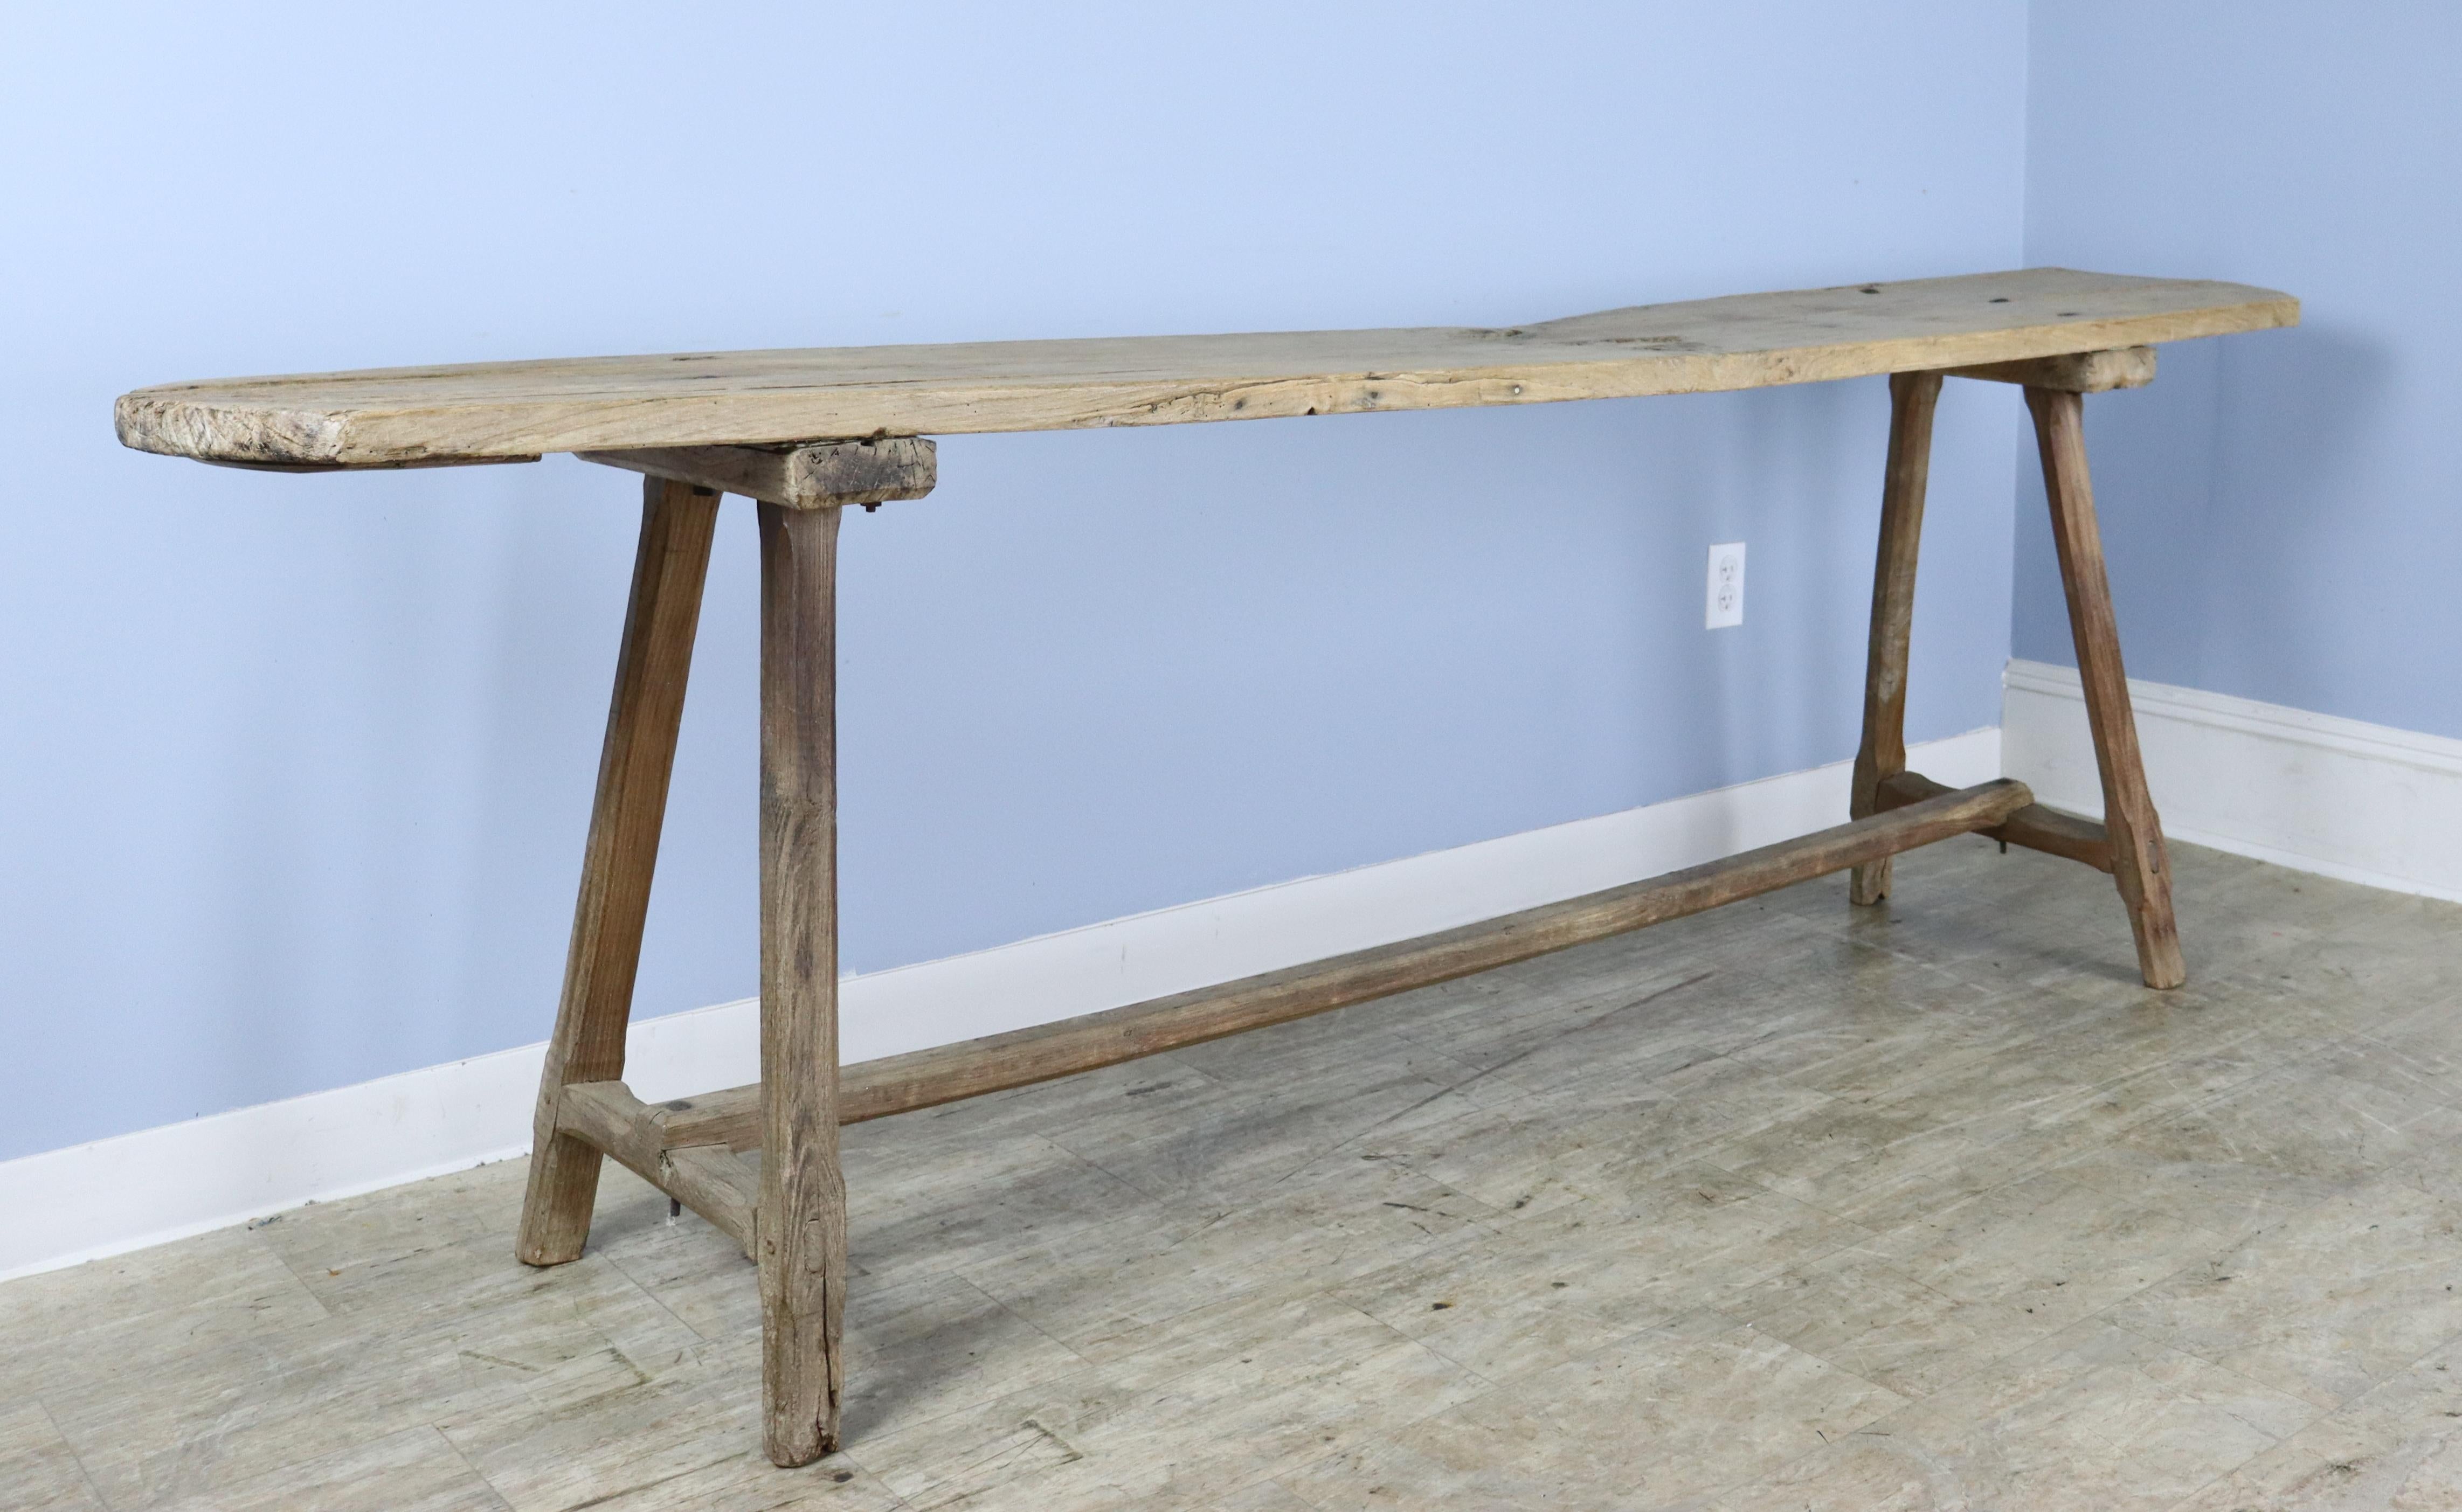 A well worn poplar serving or work table with lots of interesting wear and naturalistic grain and knotholes. The natural curves of the poplar planks give this piece a truly organic country look. We believe the piece has been bleached naturally over